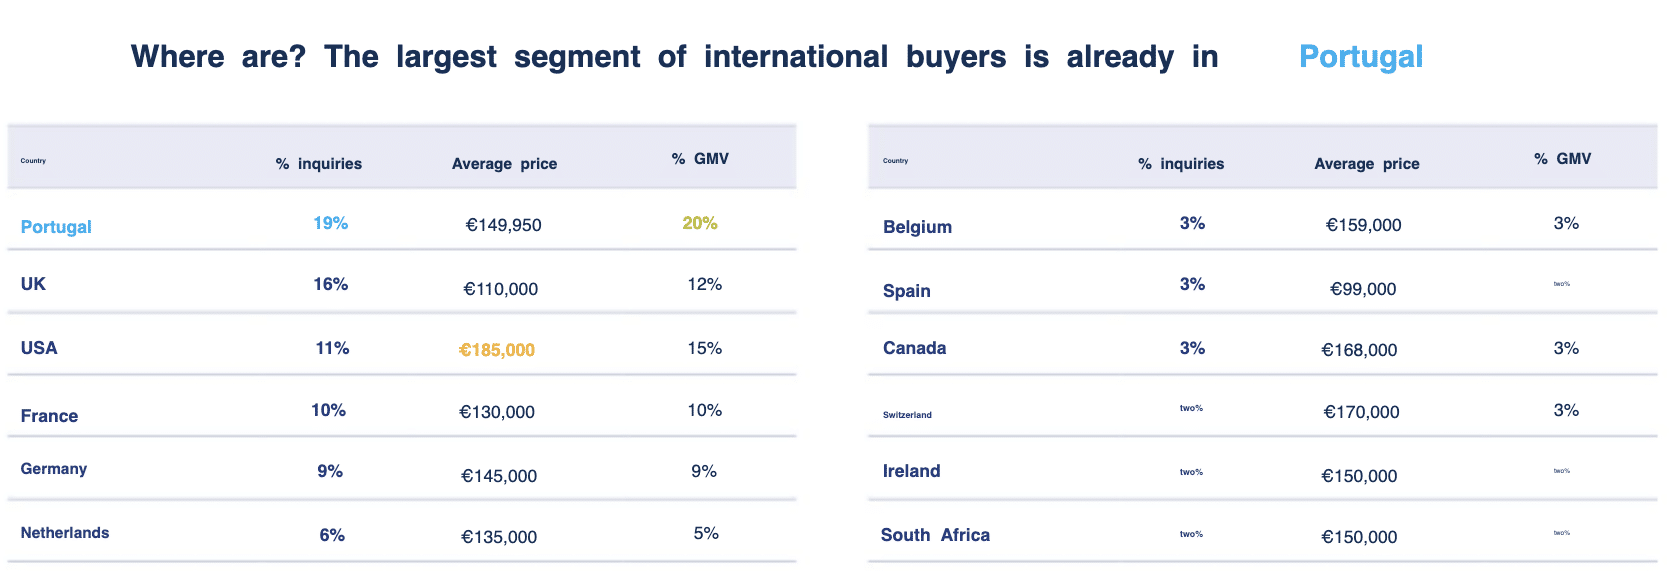 location of buyers at the time of consultation